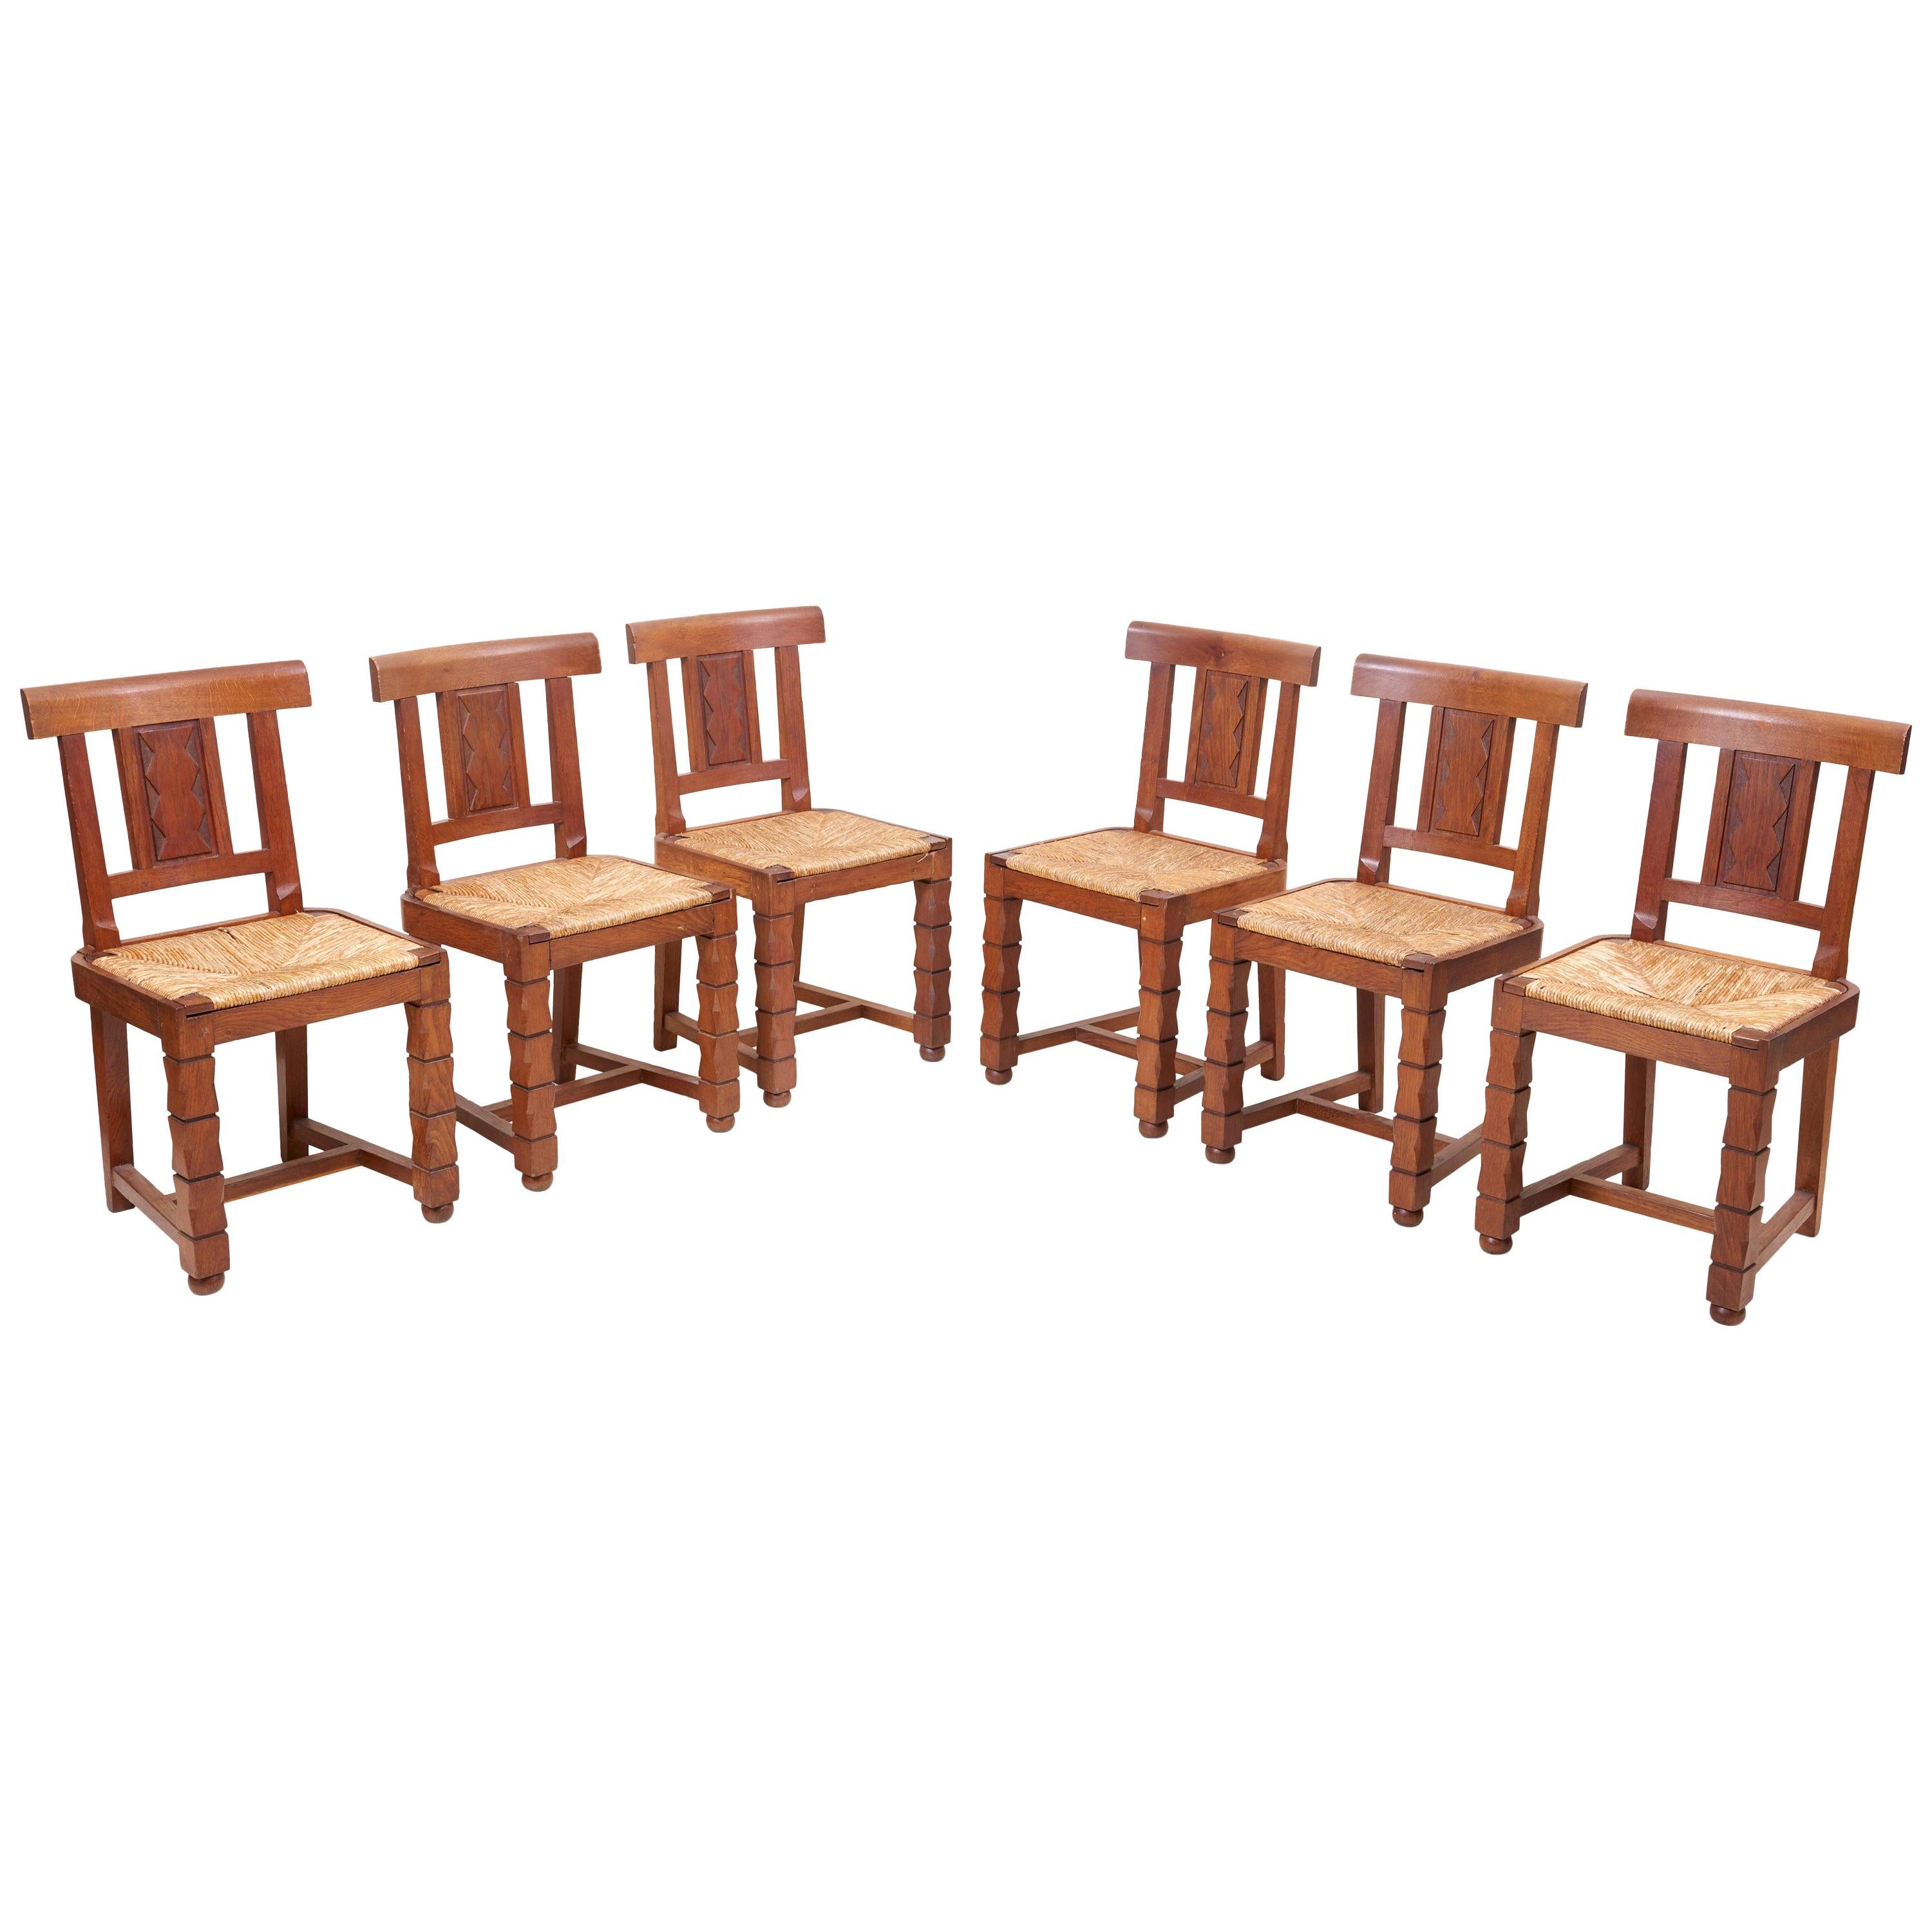 Set of Six Wooden Chairs by Jacques Mottheau, France, 1930s